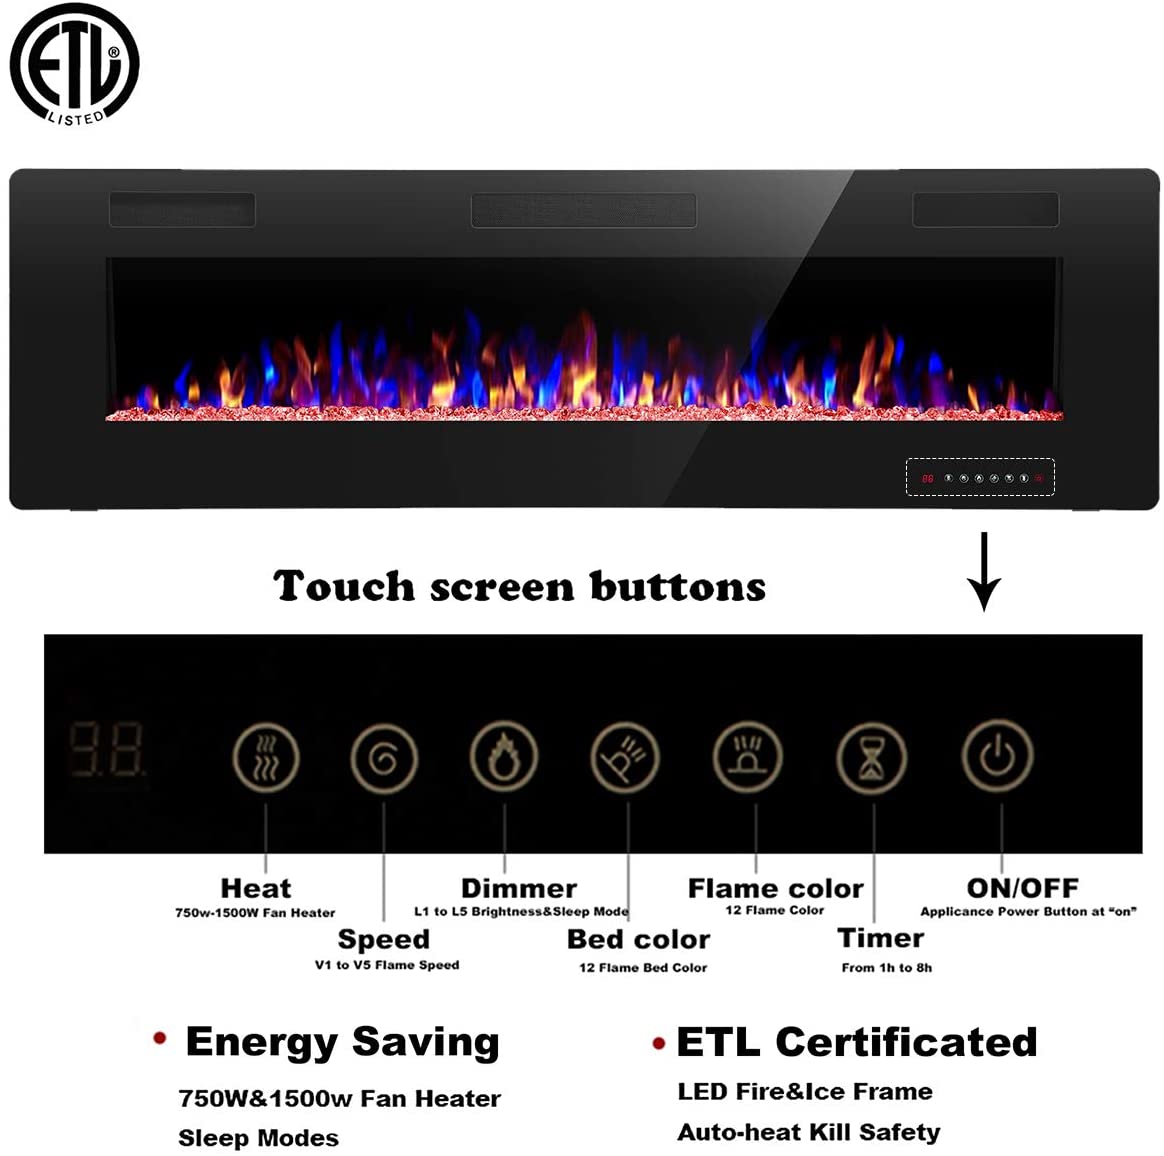 R.W.FLAME Recessed Wall Mounted Electric Fireplace, 750W-1500W